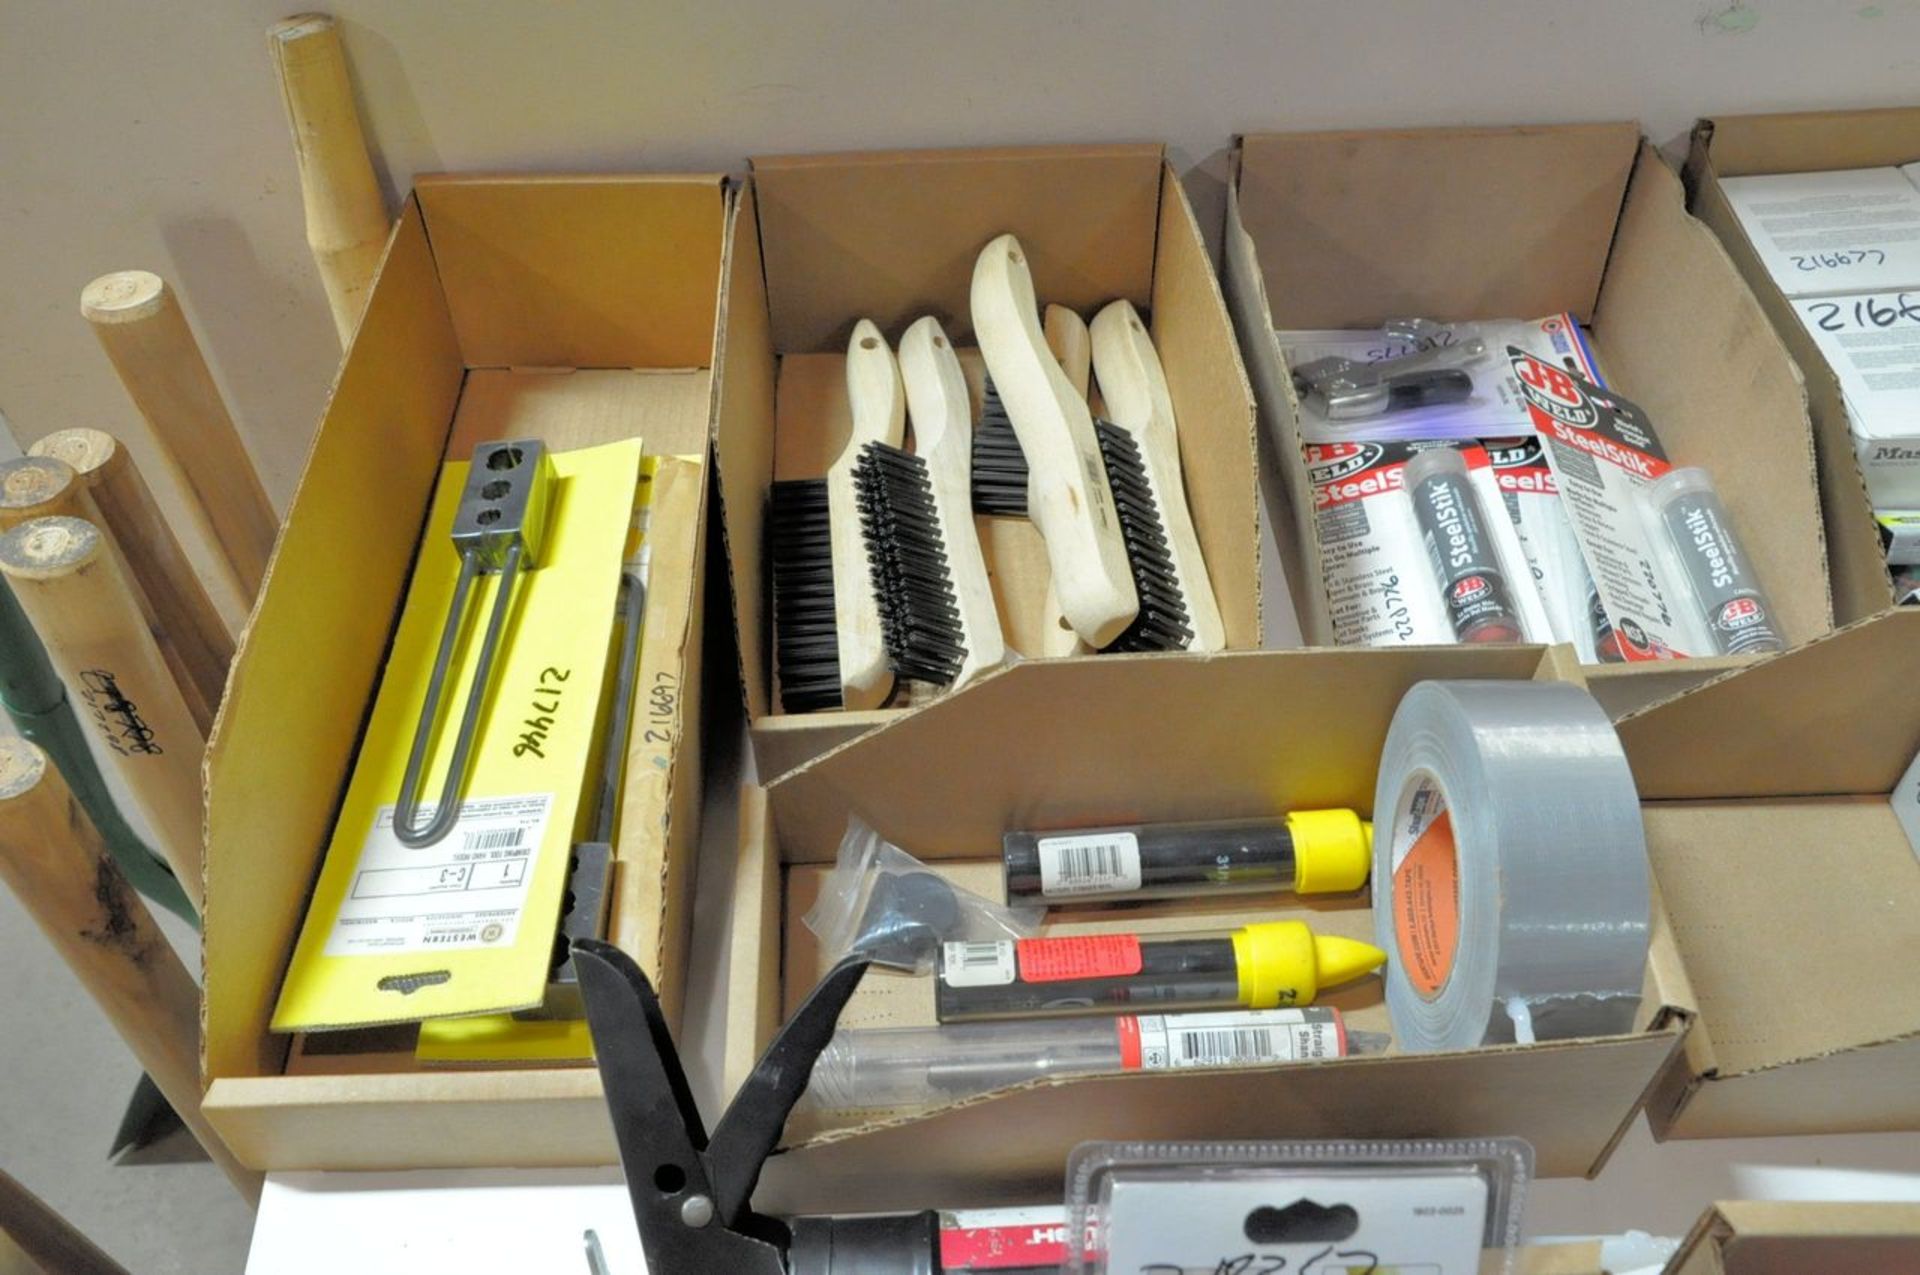 Lot - Tape Measures, Levels, Wire Brushes, Batteries, Flashlights, Saw Blades, etc. on (1) Desk Top, - Image 2 of 6